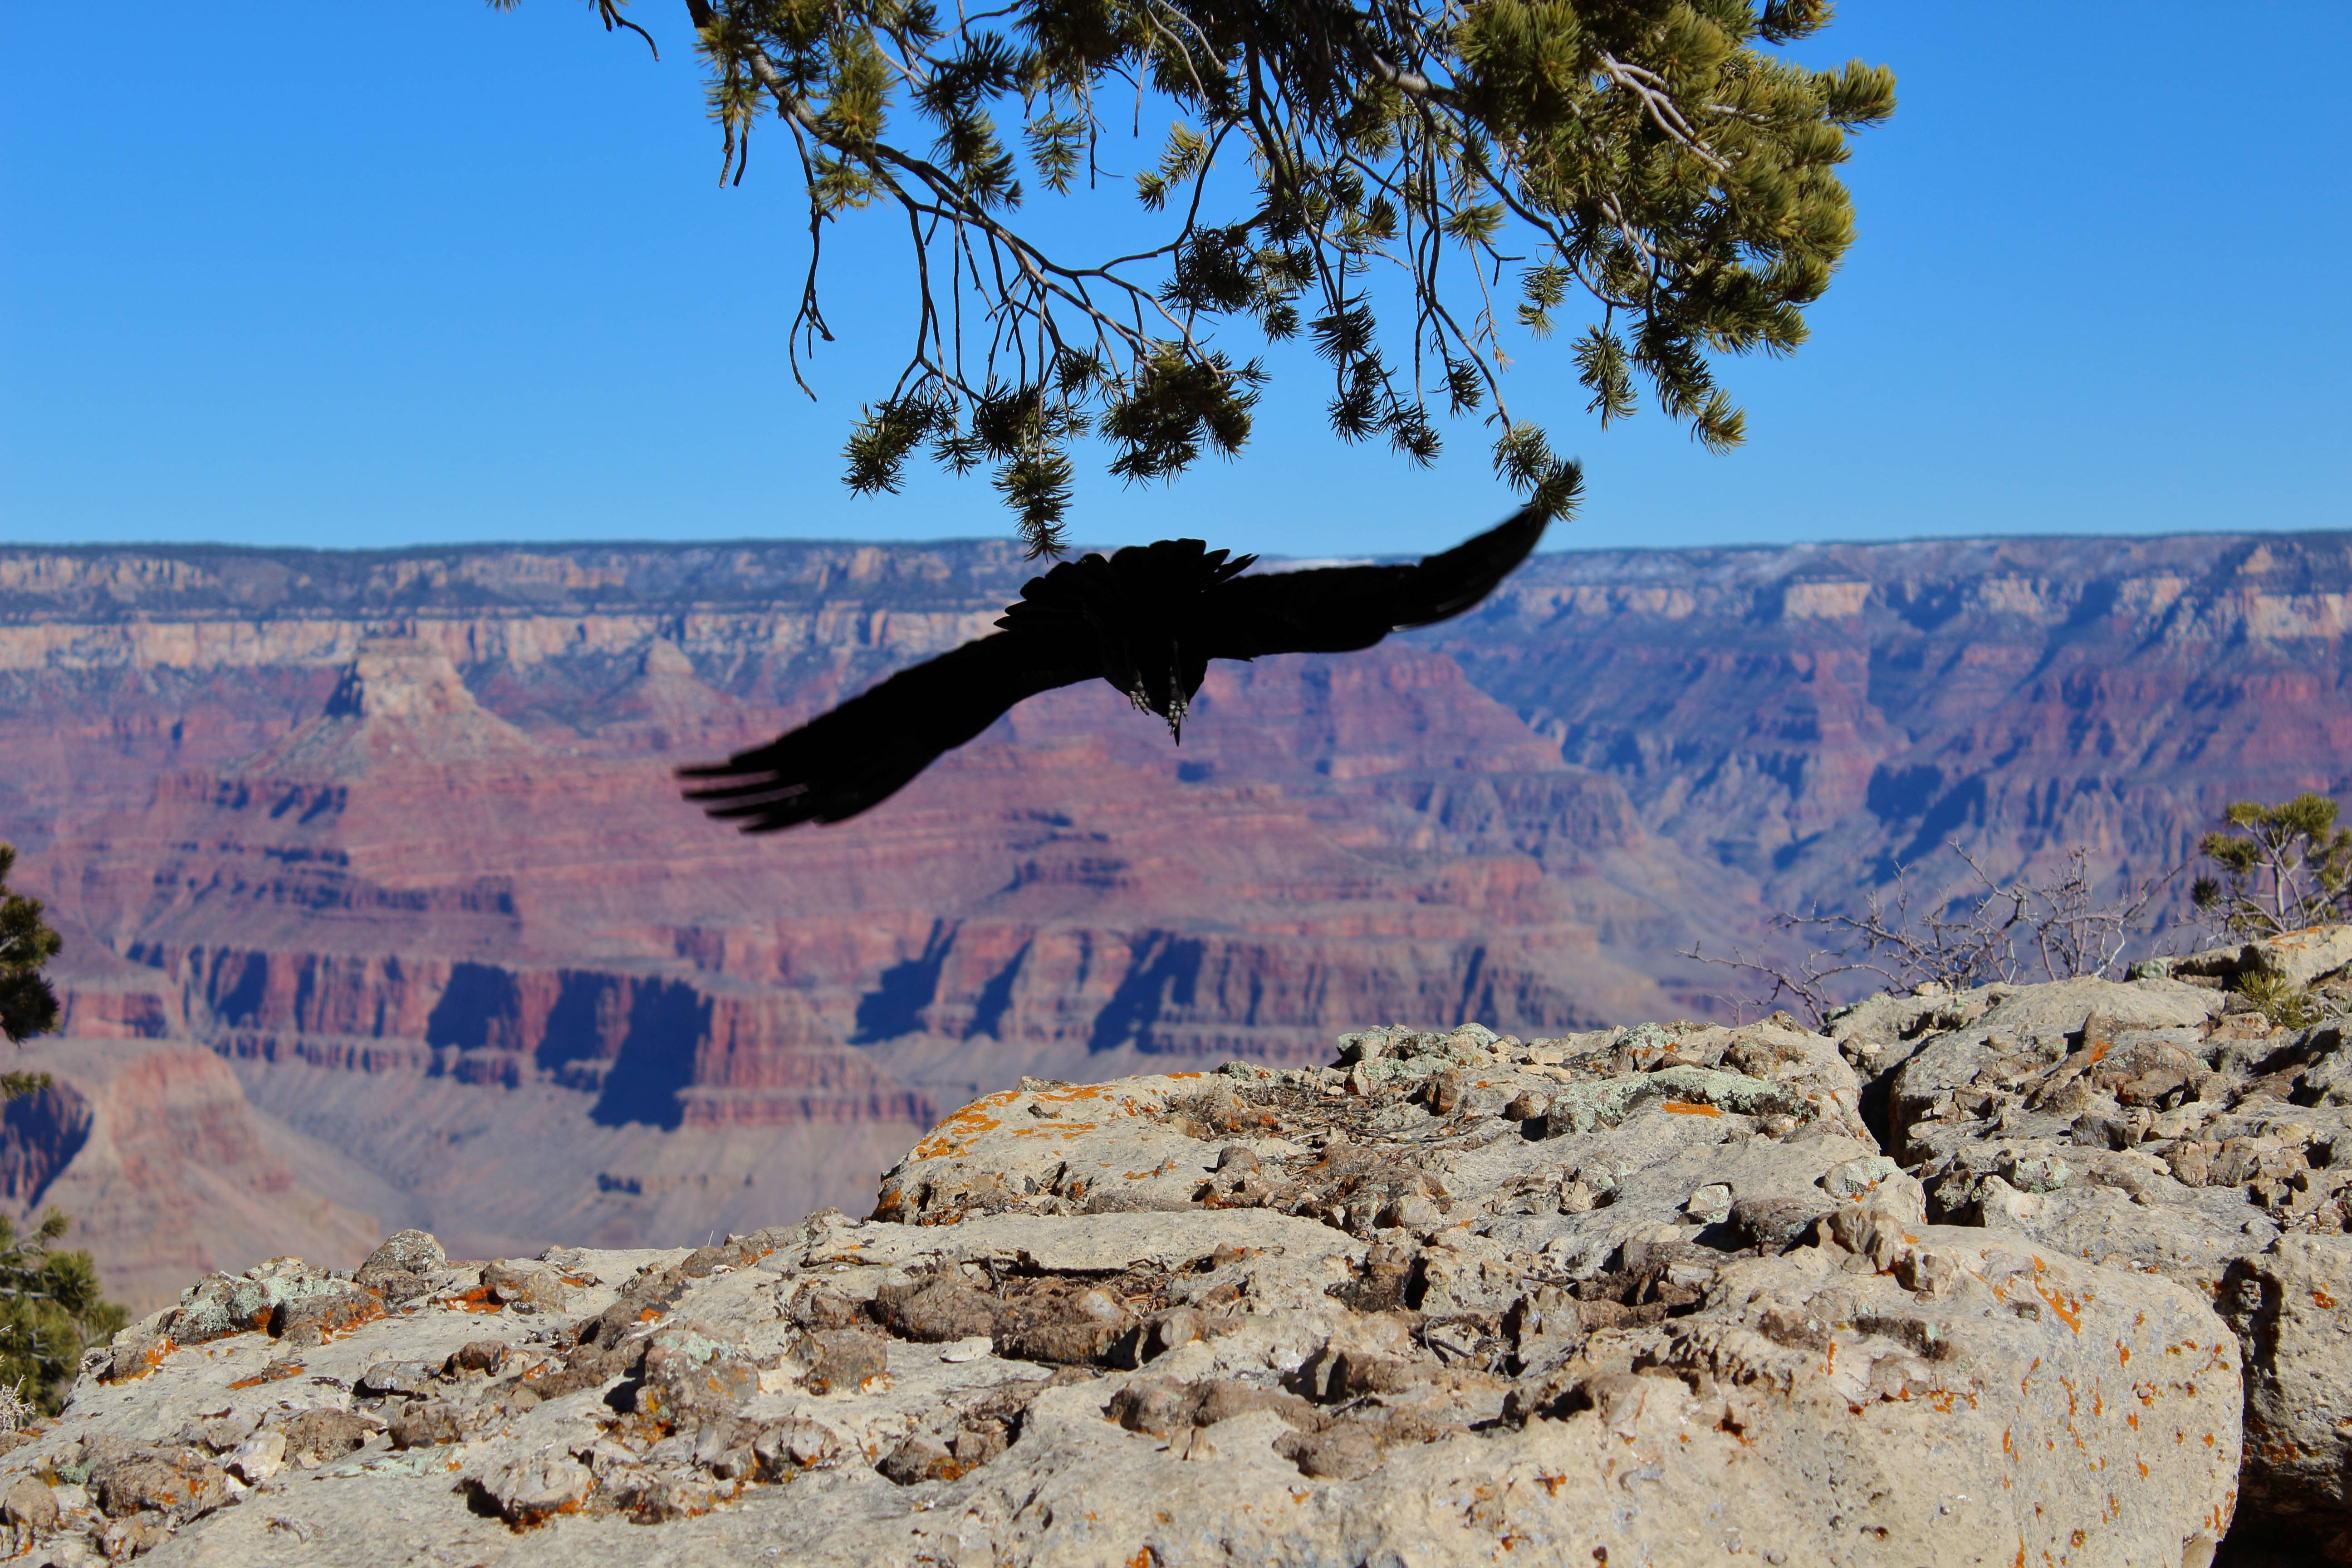 Photo by Patrick Macaulay  |  An American crow diving down into the Grand Canyon, overlooking the Bright Angel Trail